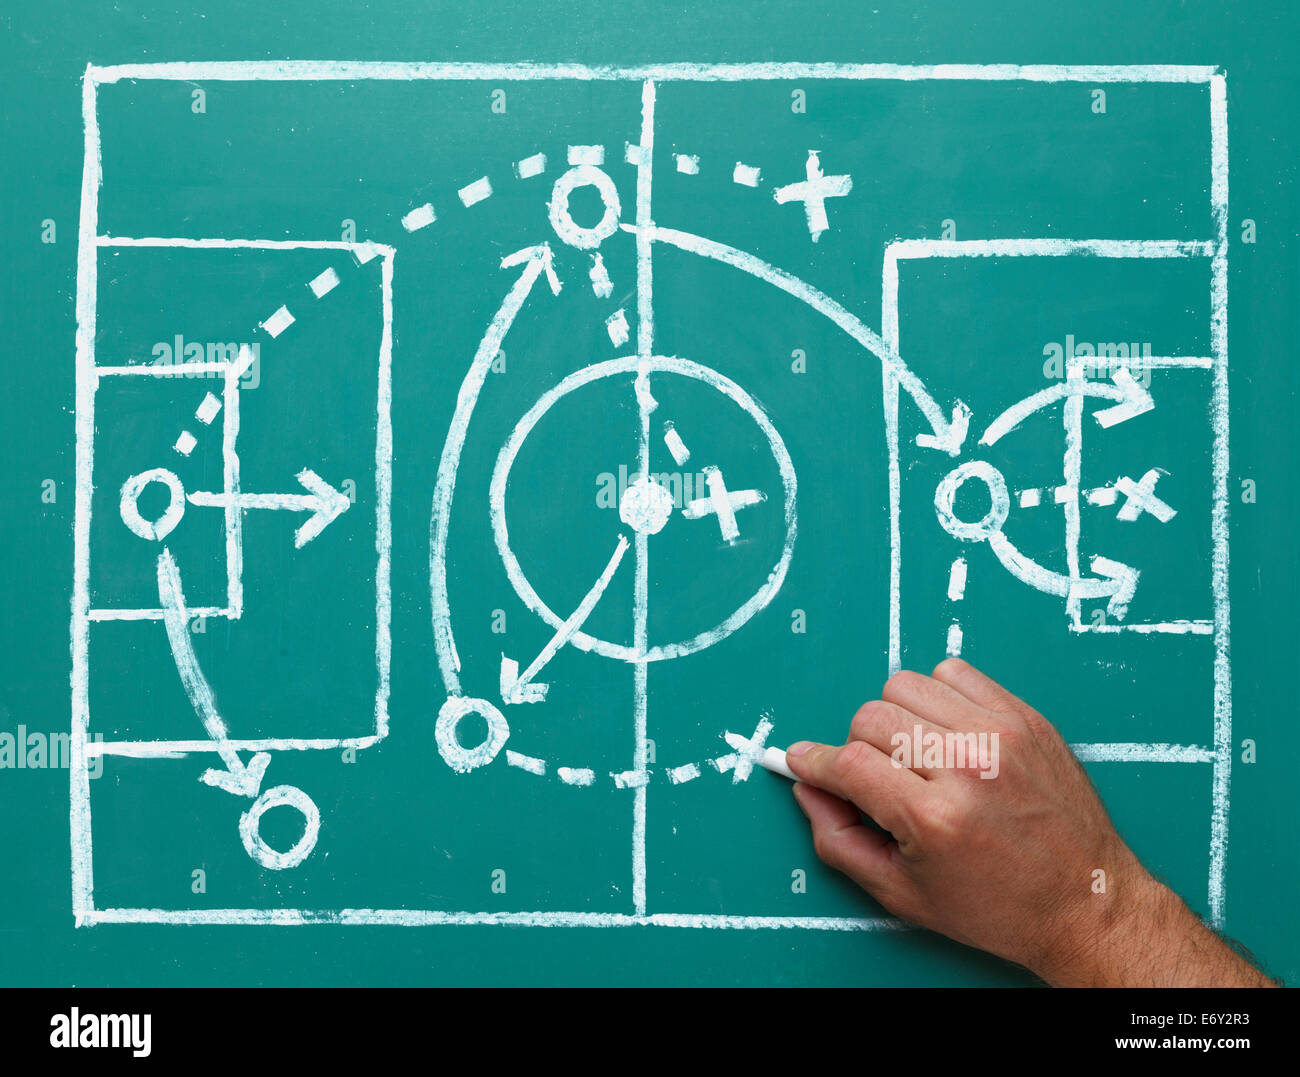 Soccer Play on Chalk Board with Hand Drawing Soccer Field and Plan. Stock Photo